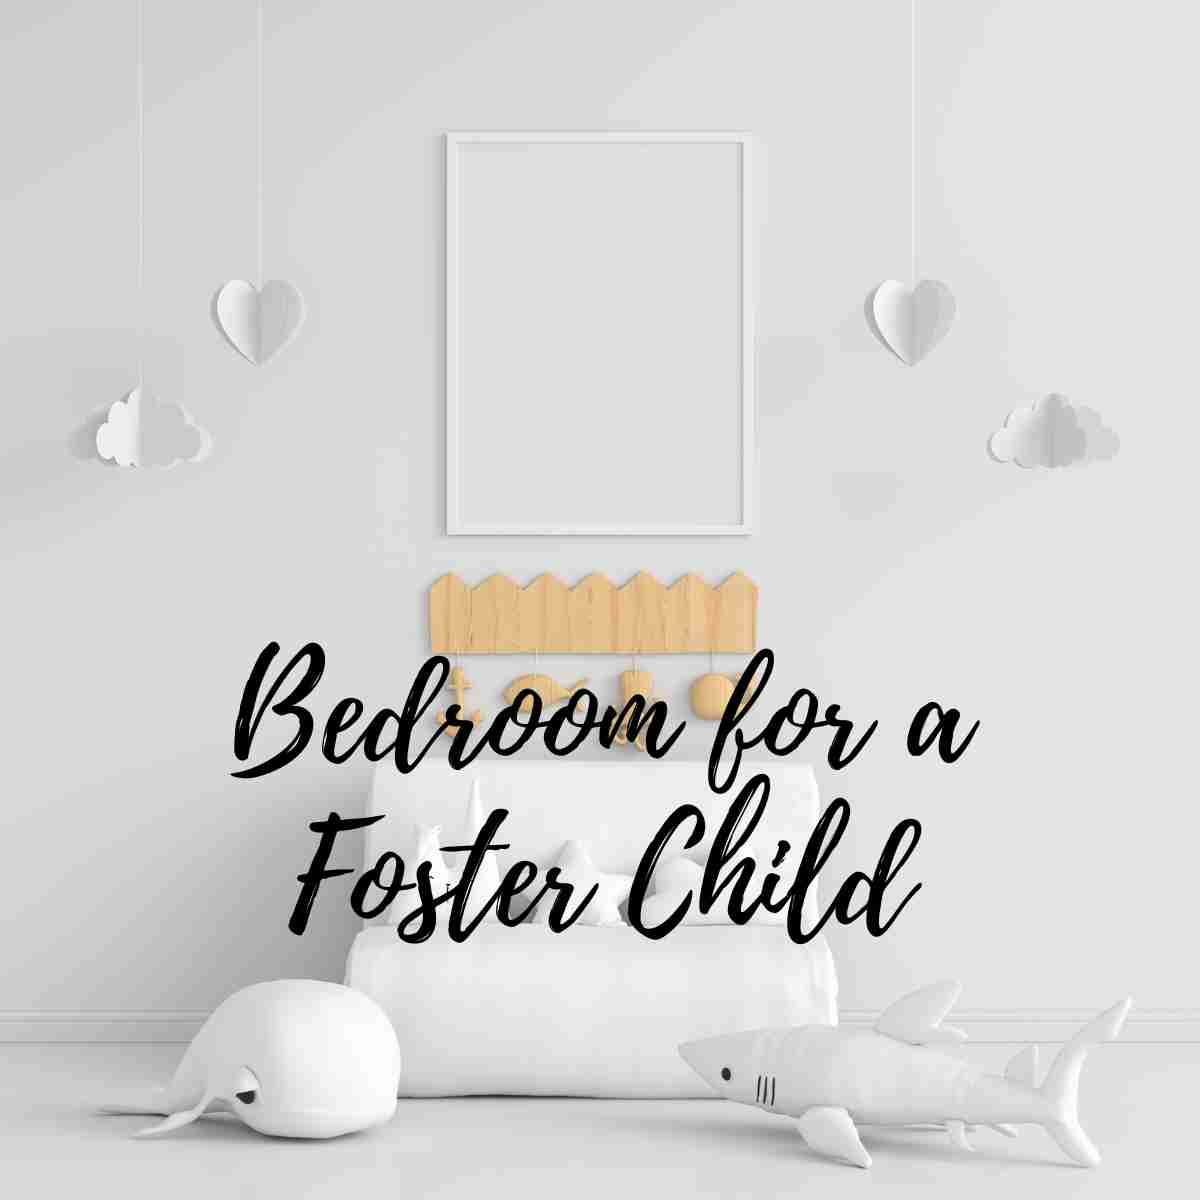 Welcoming Bedroom for a Foster Child